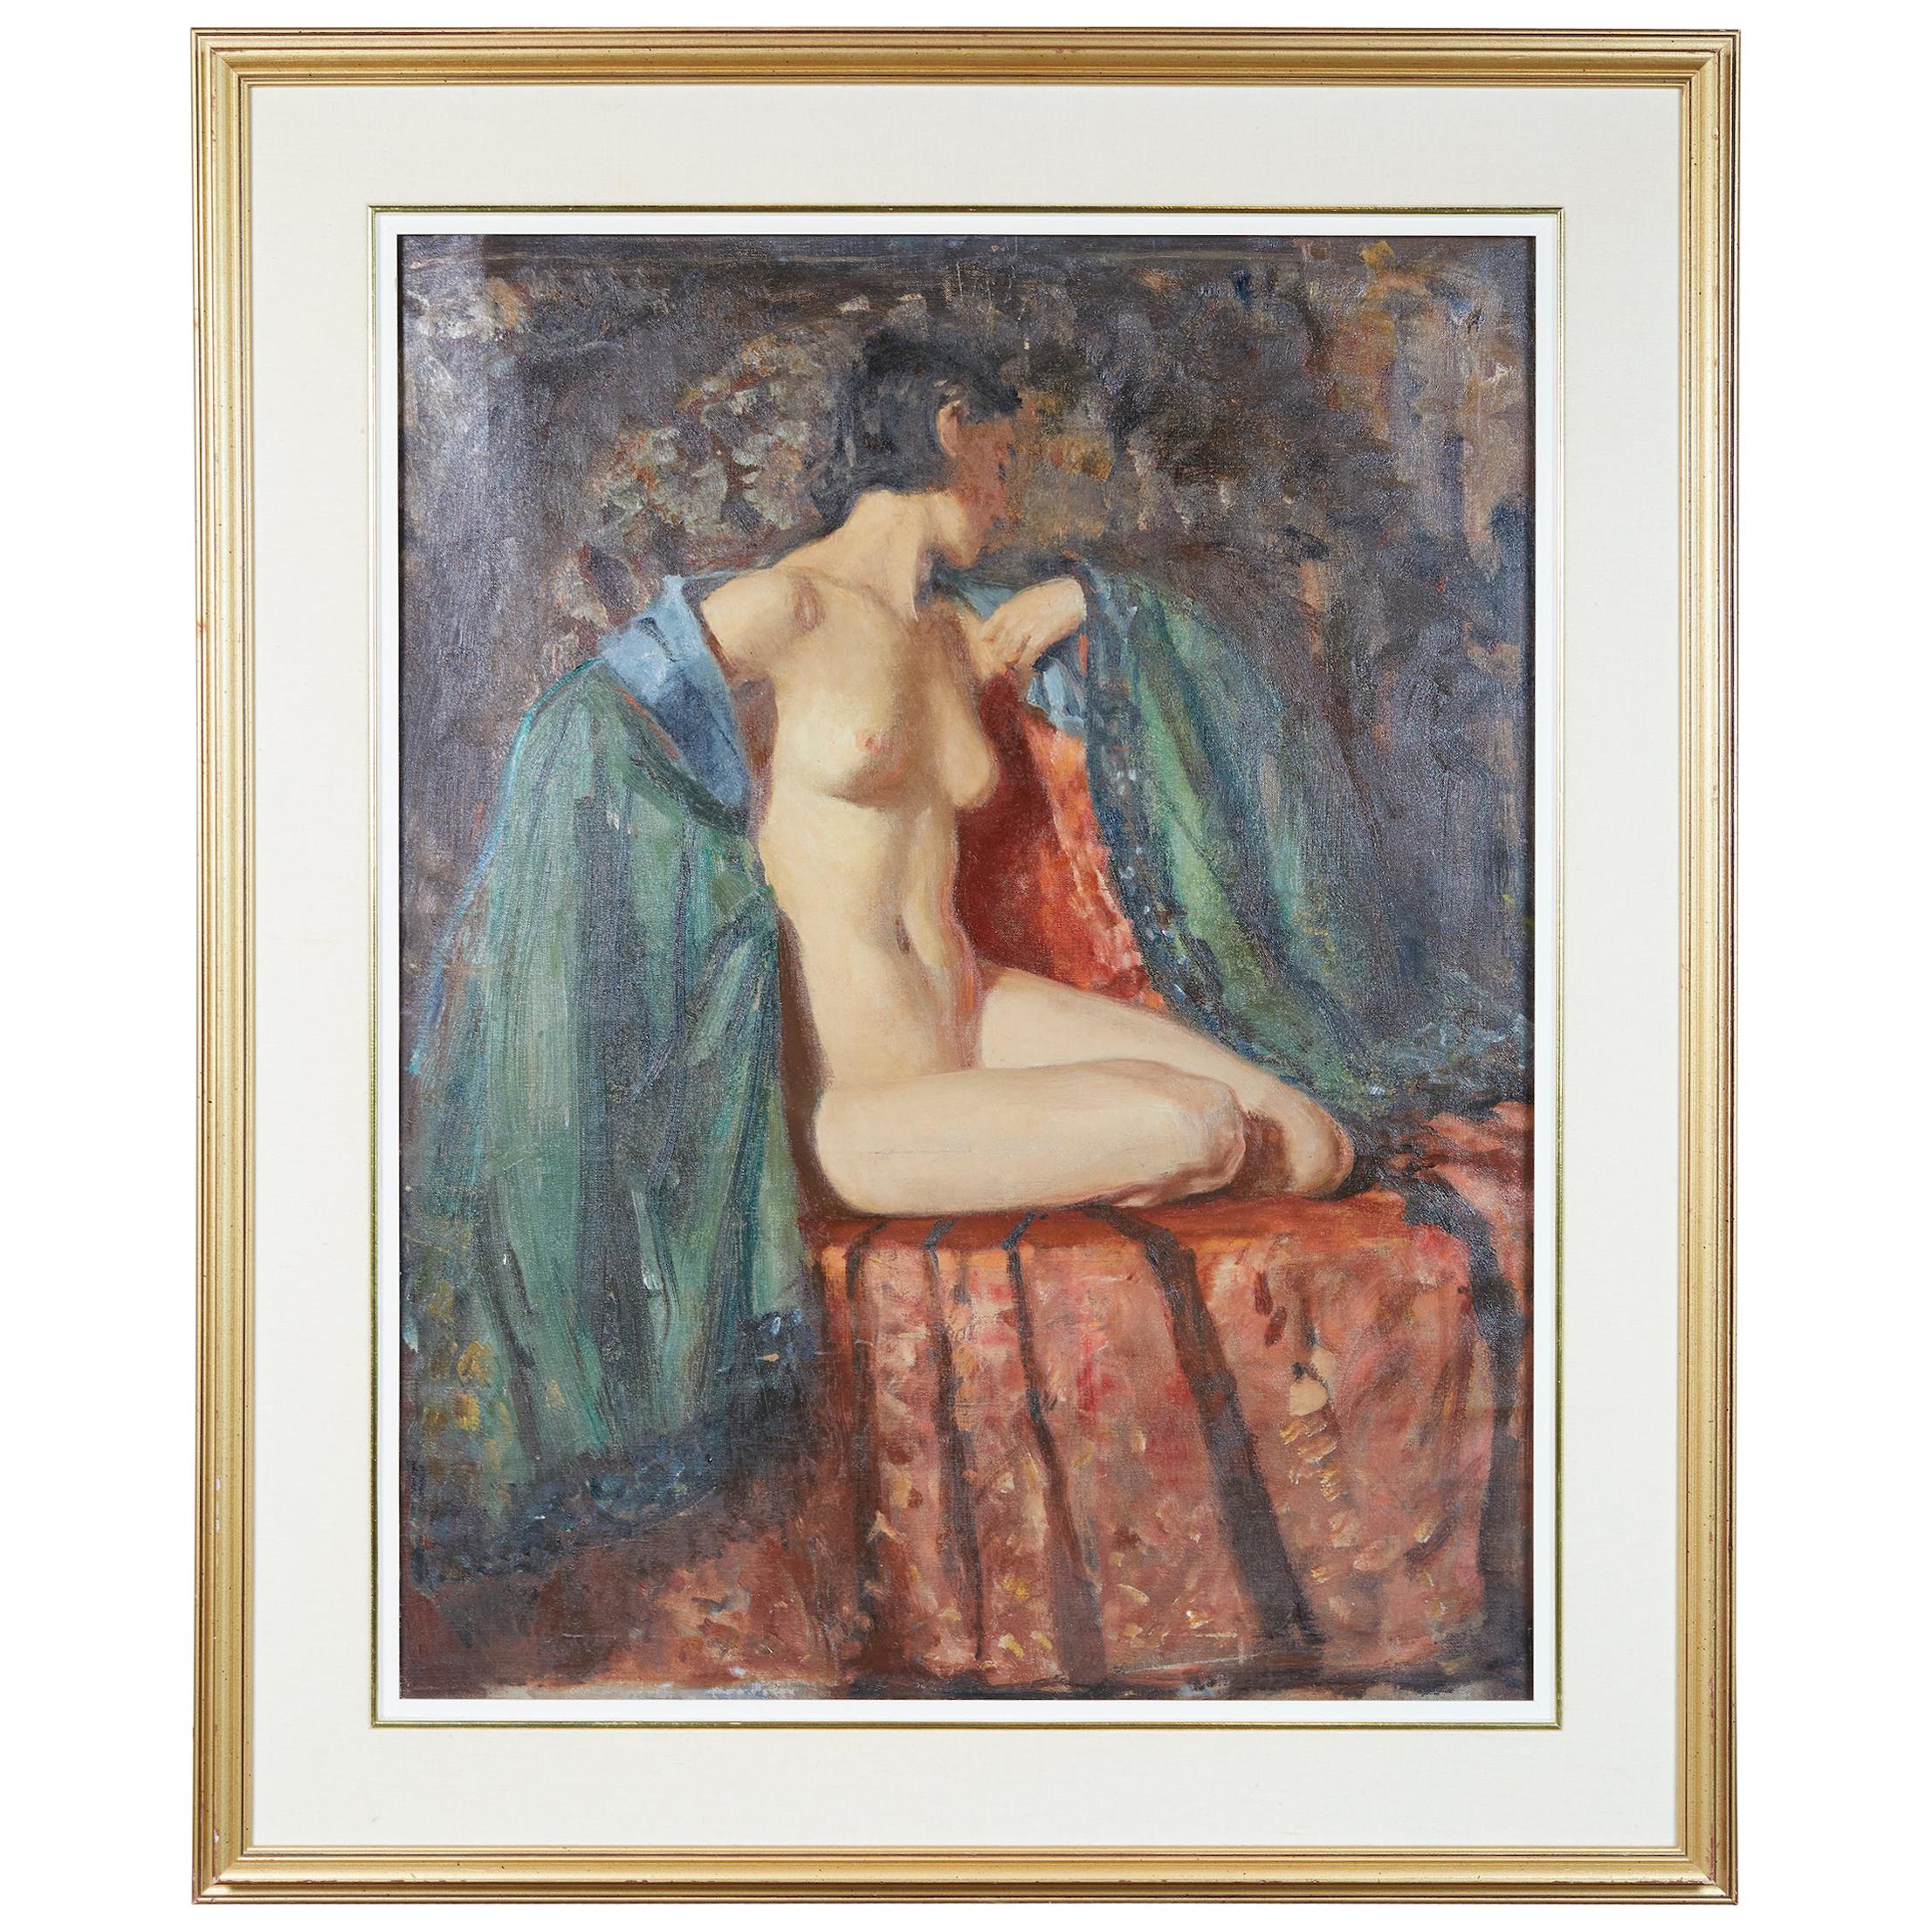 Painting of an Appeasing Nude by Adam Sherriff Scott